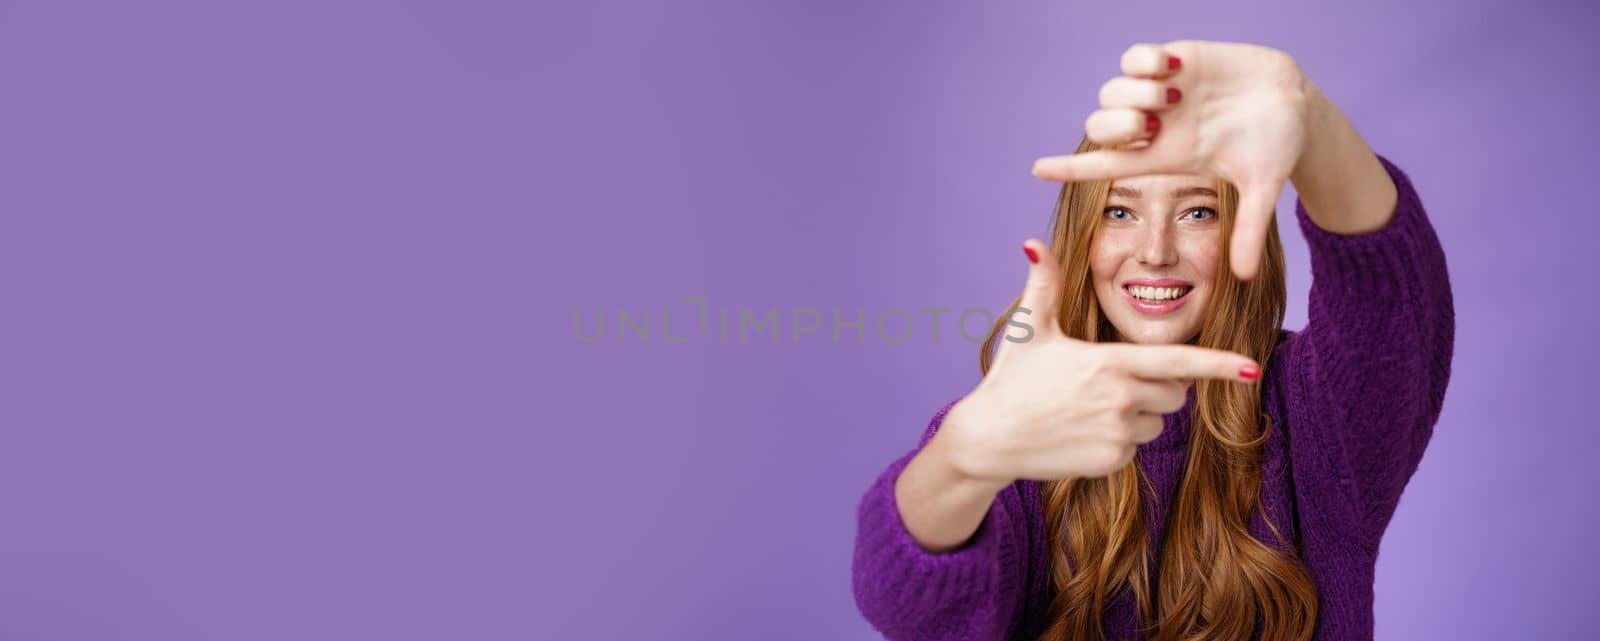 Imagine if. Portrait of hopeful and carefree creative charming redhead 20s woman showing frame with pulled hands and smiling through it as picturing bright and happy future over purple background.